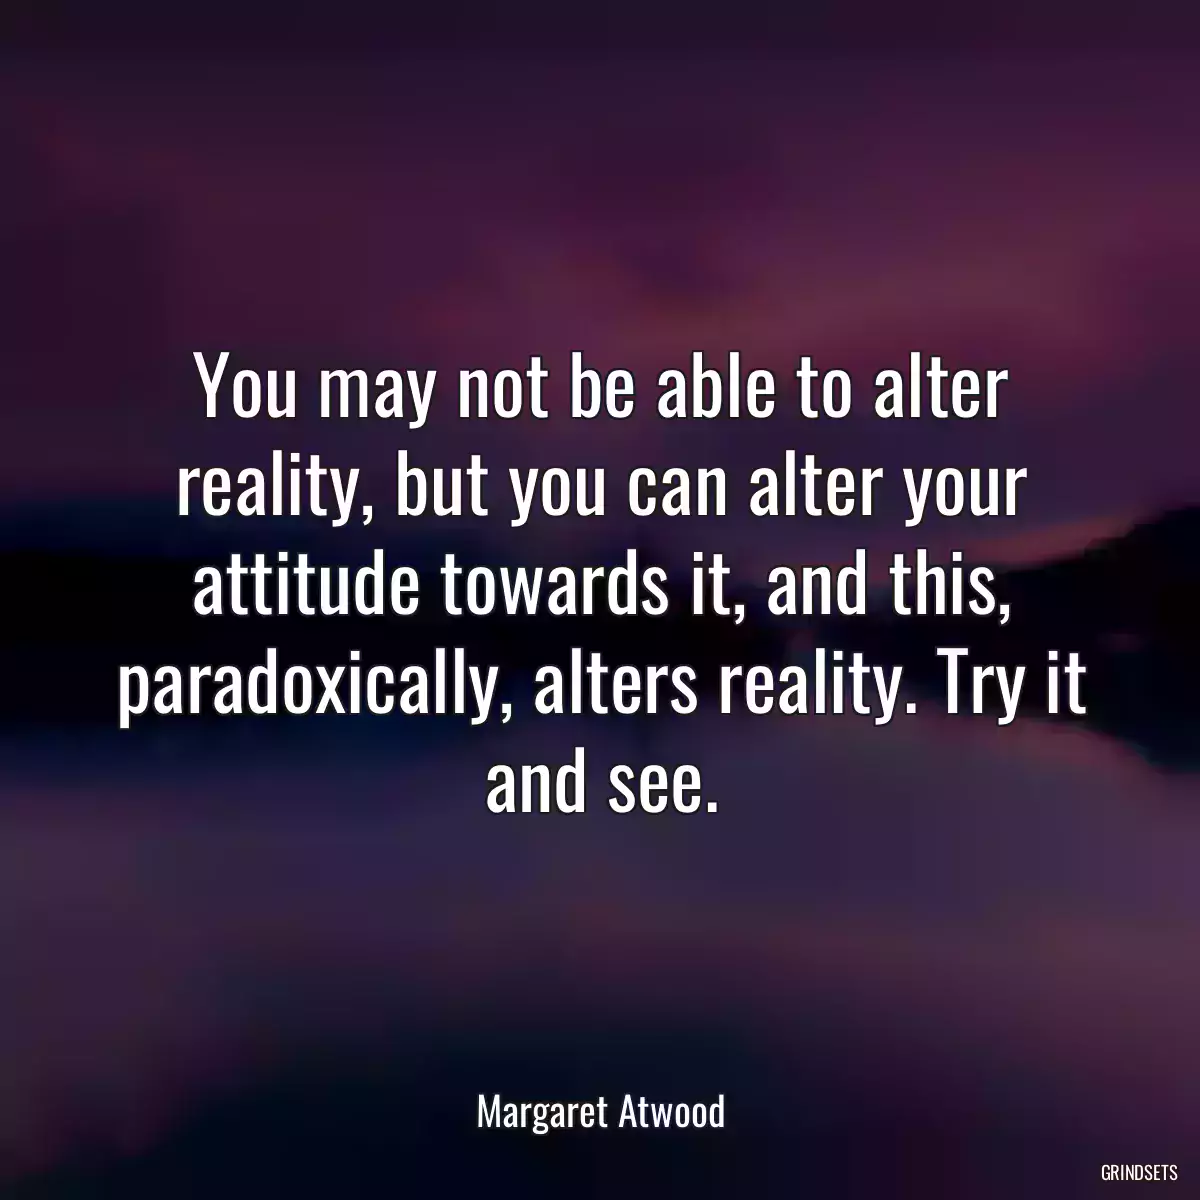 You may not be able to alter reality, but you can alter your attitude towards it, and this, paradoxically, alters reality. Try it and see.